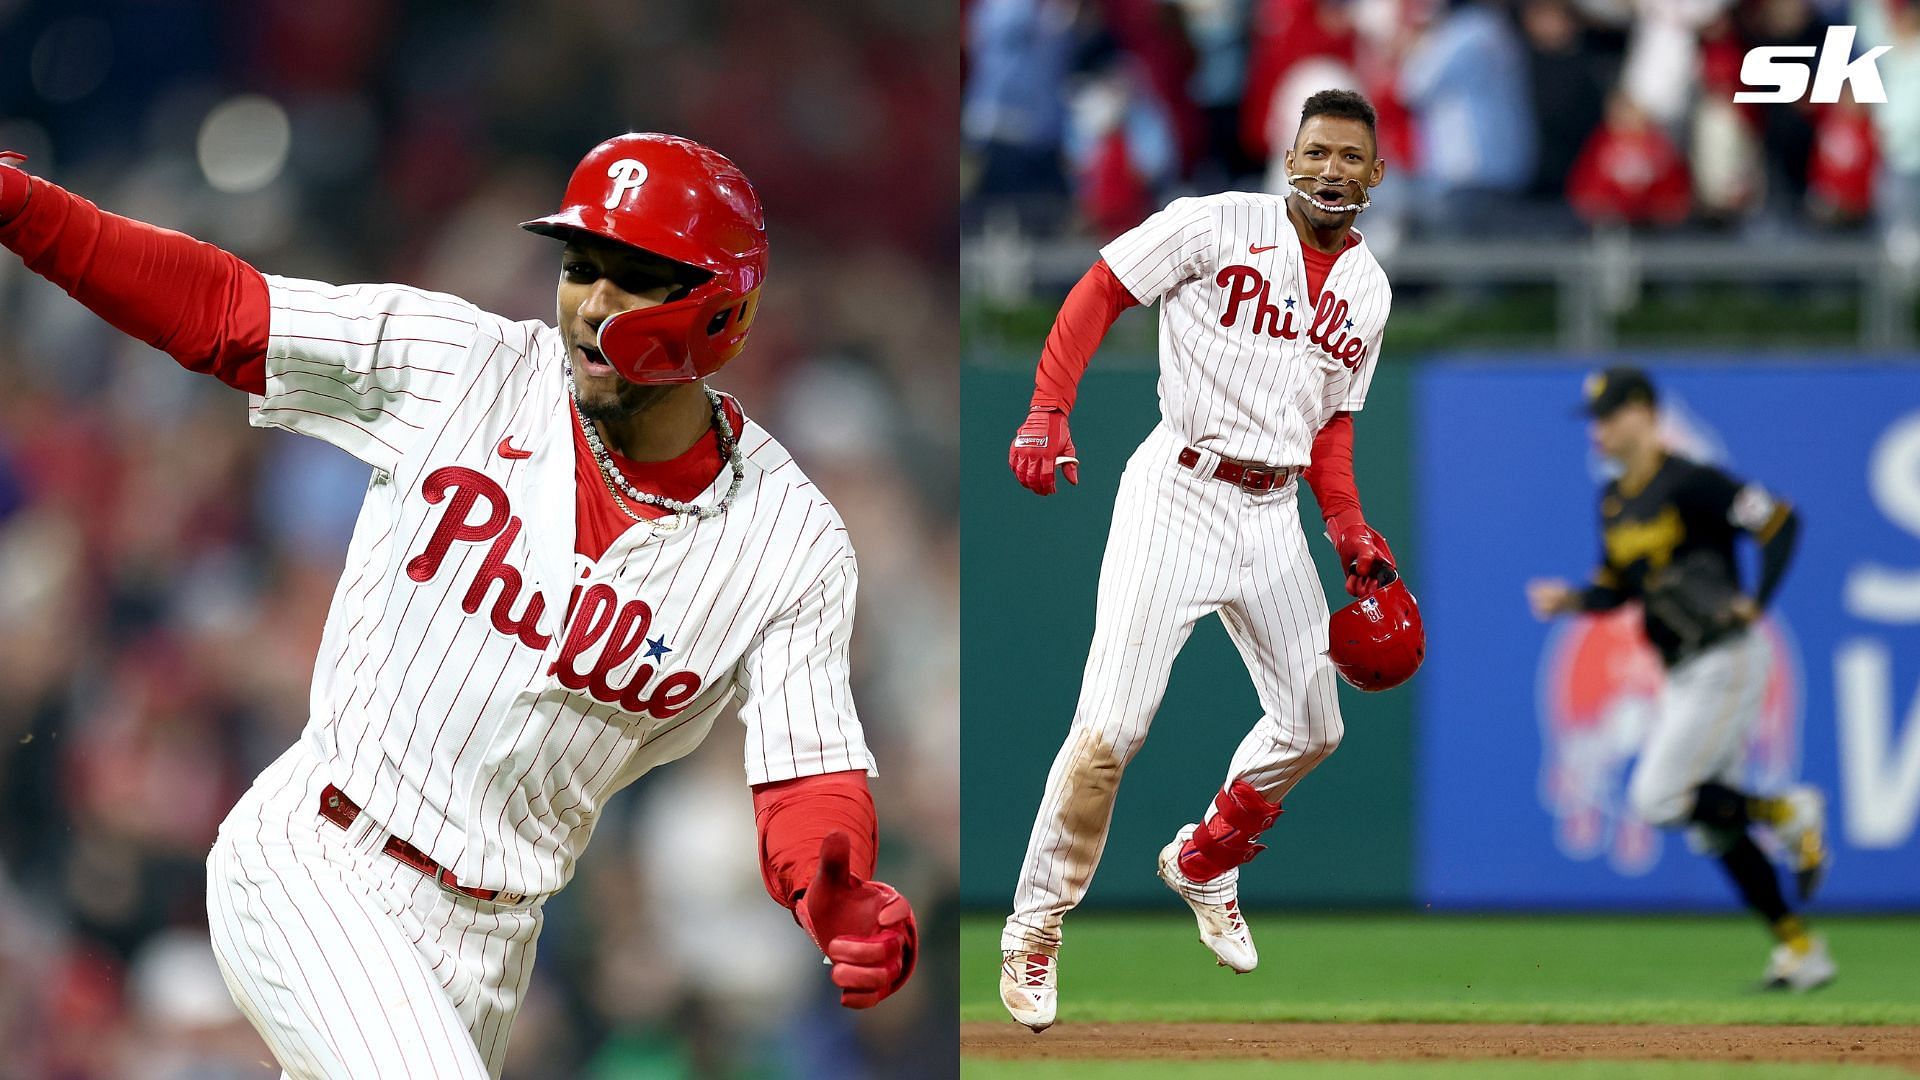 Photos from the Phillies walk-off win